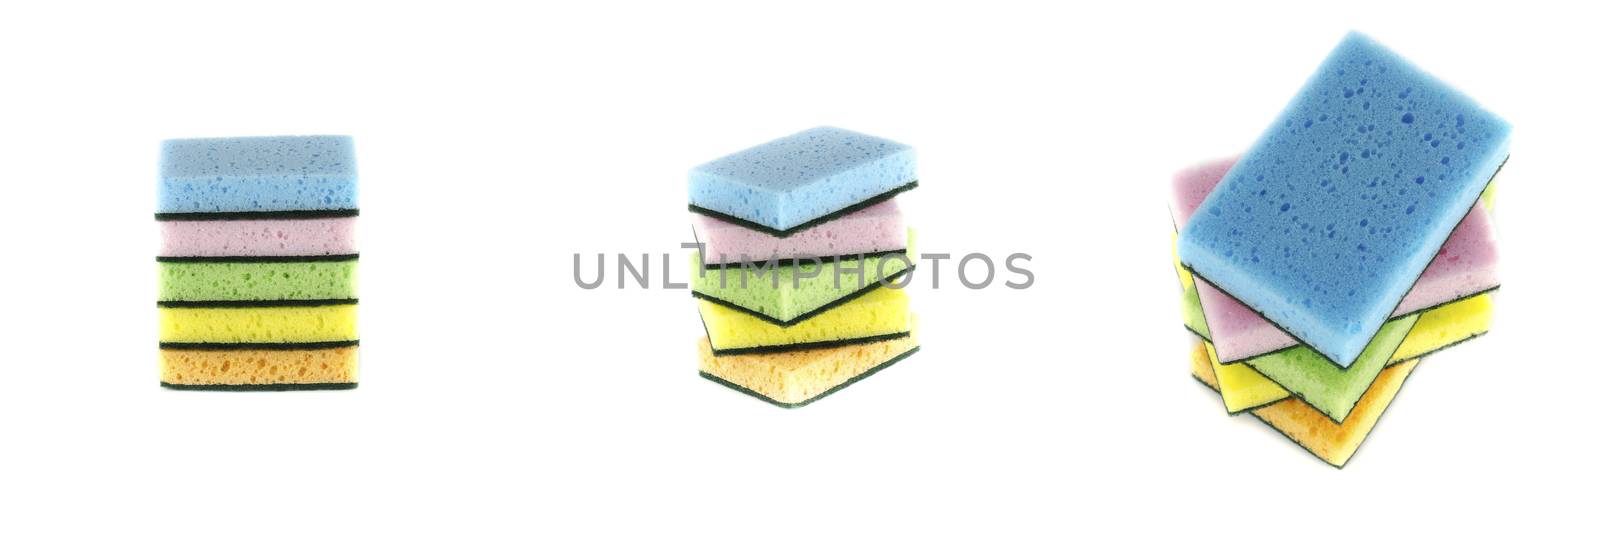 household cleaning sponge for cleaning isolated on white background